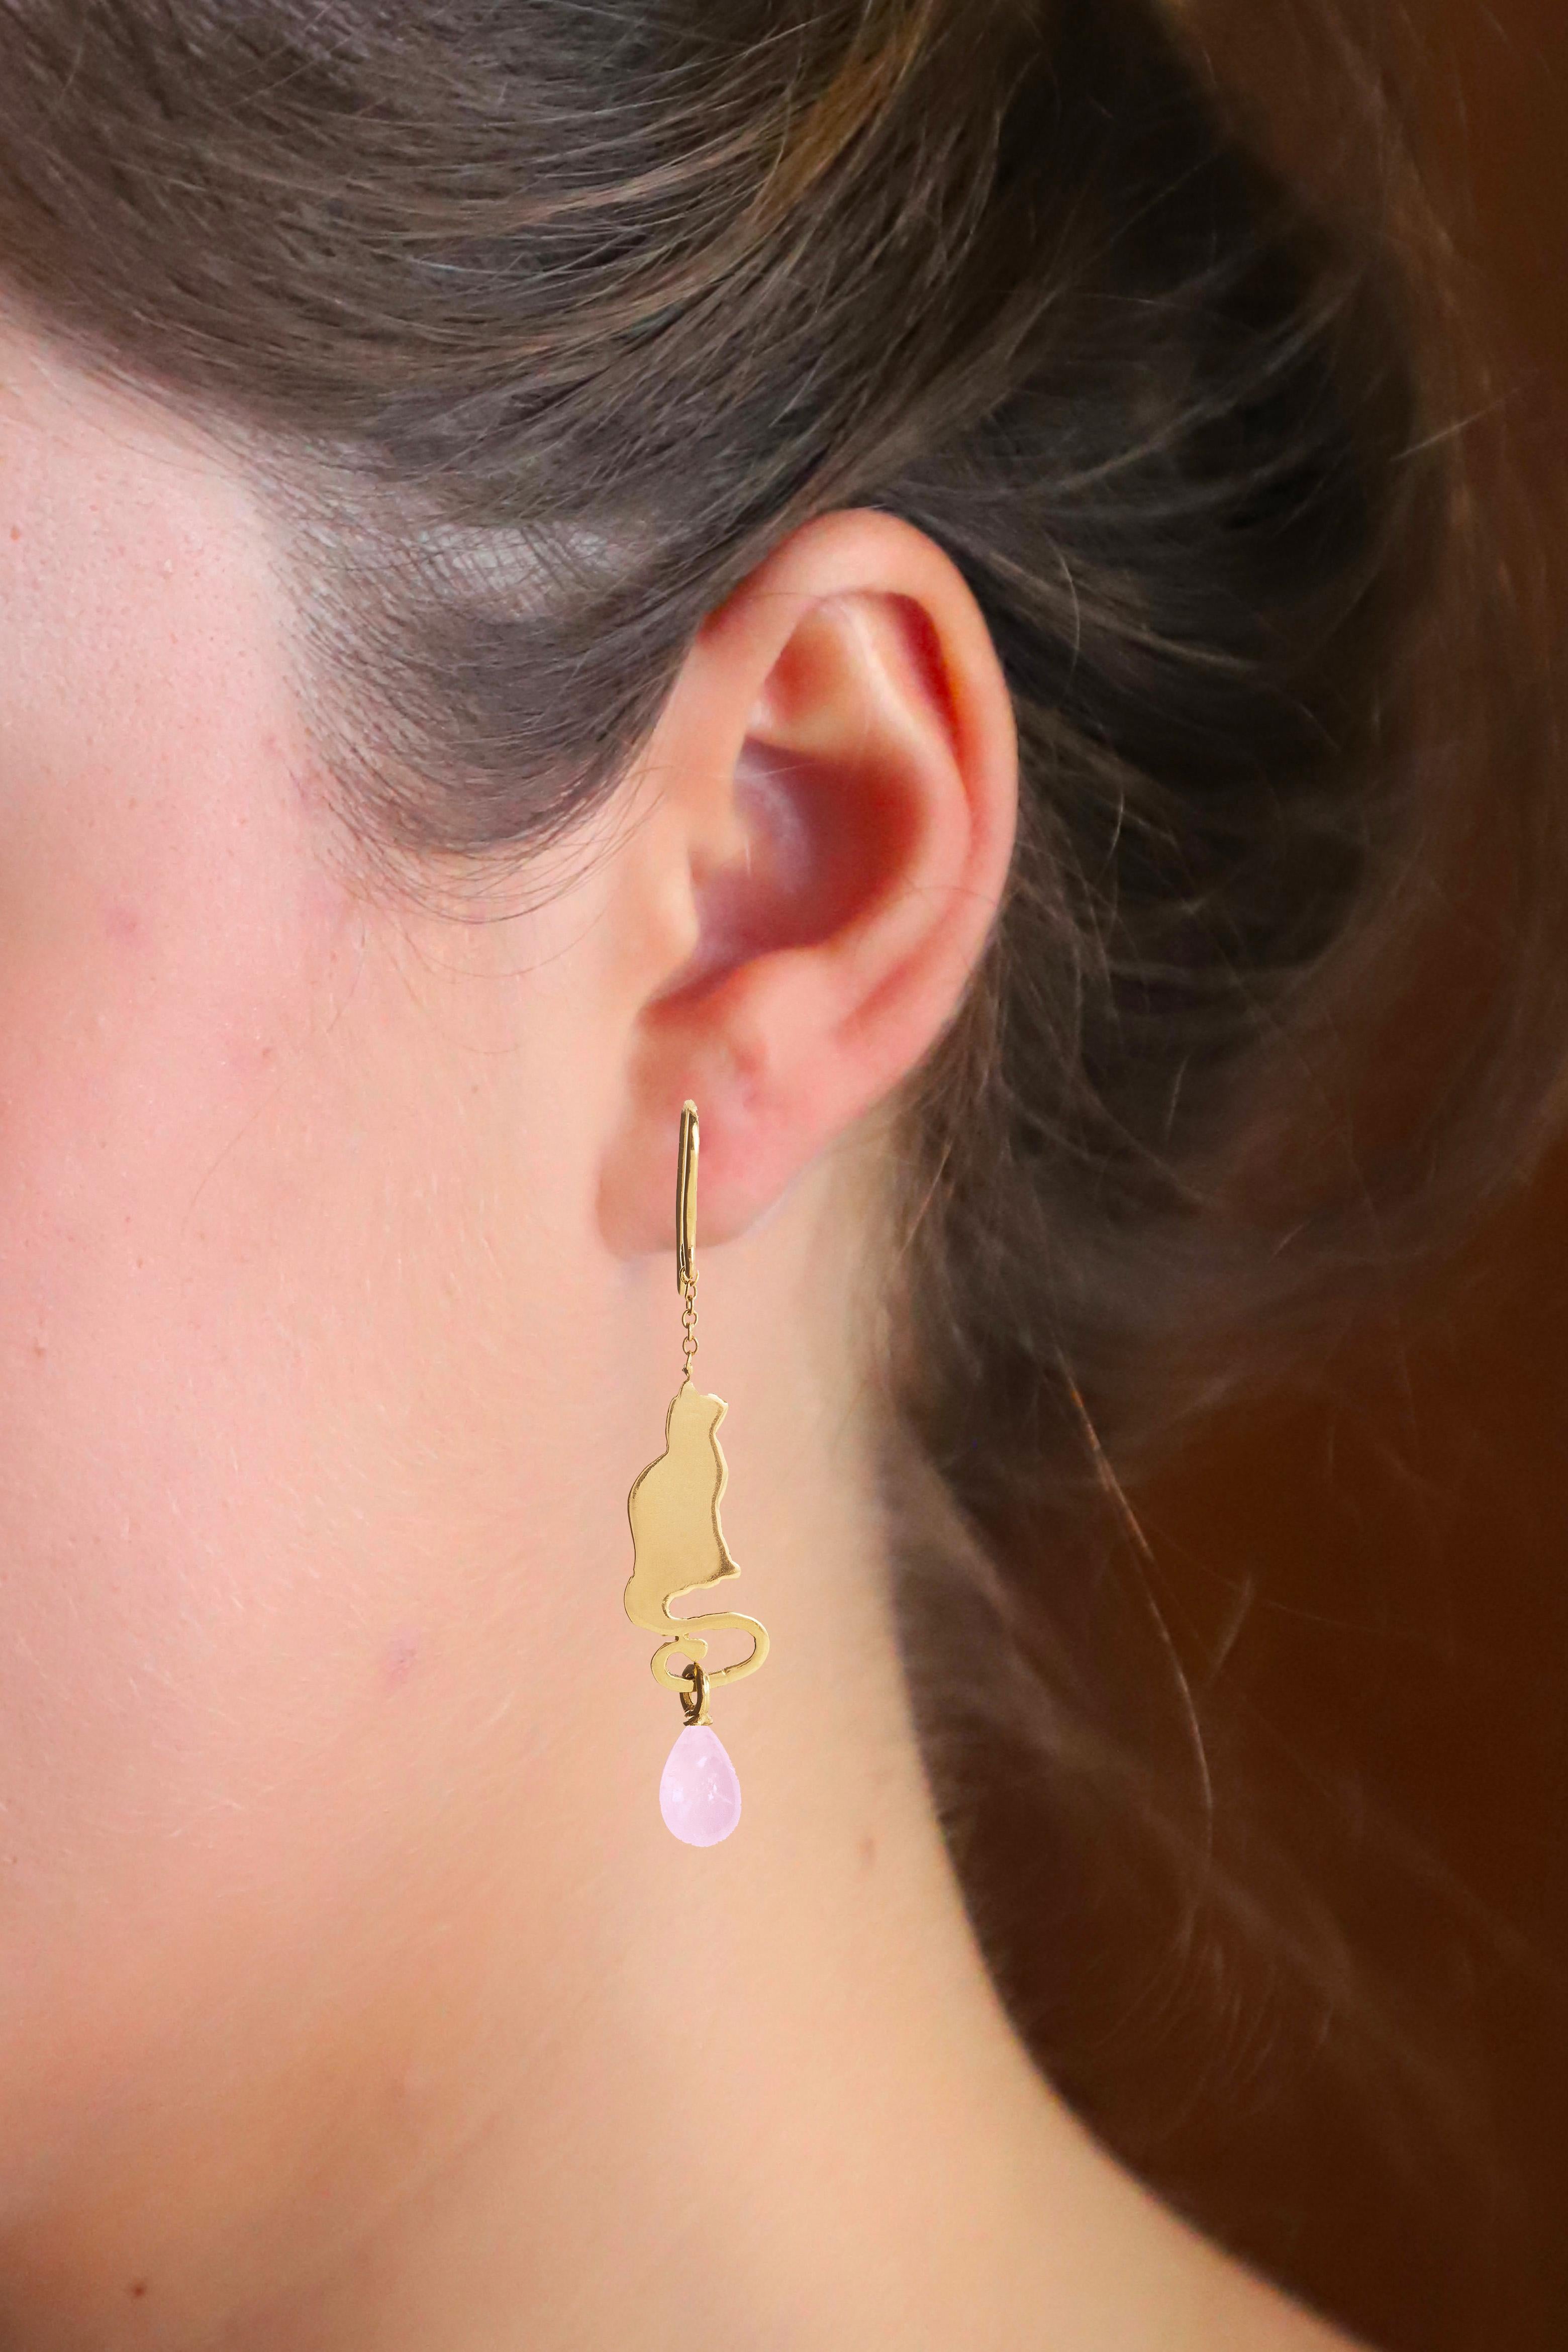 Behold the Rossella Ugolini Cat Earrings  a delightful ode to feline fancy, tailor-made for the whimsical hearts that beat with love for our four-legged friends. Crafted with devotion in 18K Yellow Gold, these earrings dance with a touch of romance,